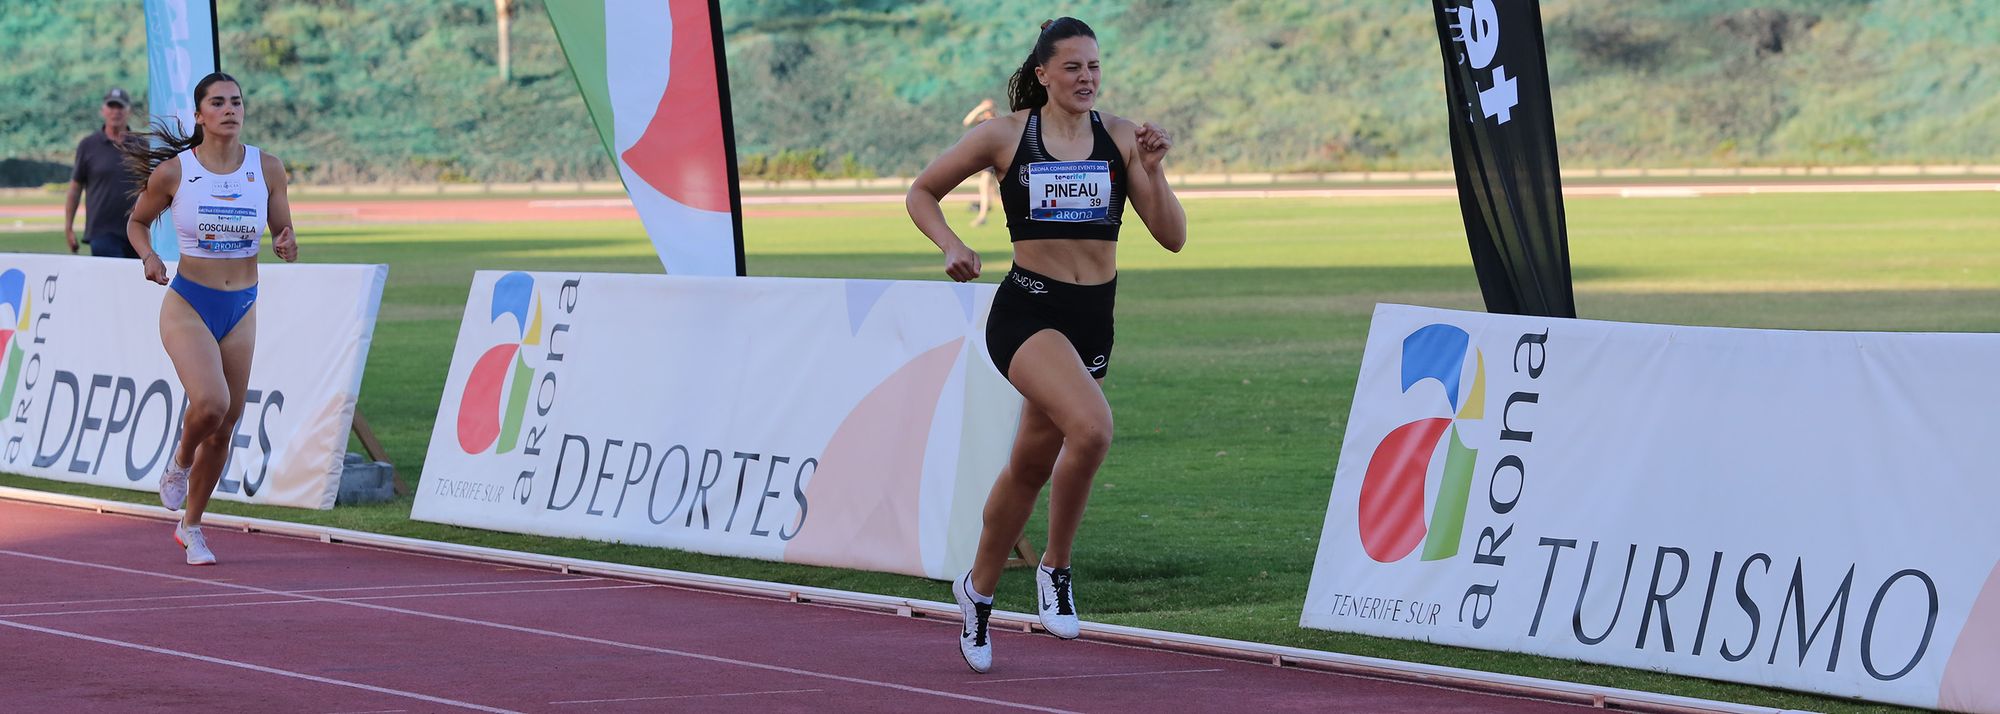 France’s Elisa Pineau (6020) and Germany’s Malik Diakite (8037) were the winners at the International Meeting of Arona – the second Gold leg of the World Athletics Combined Events Tour